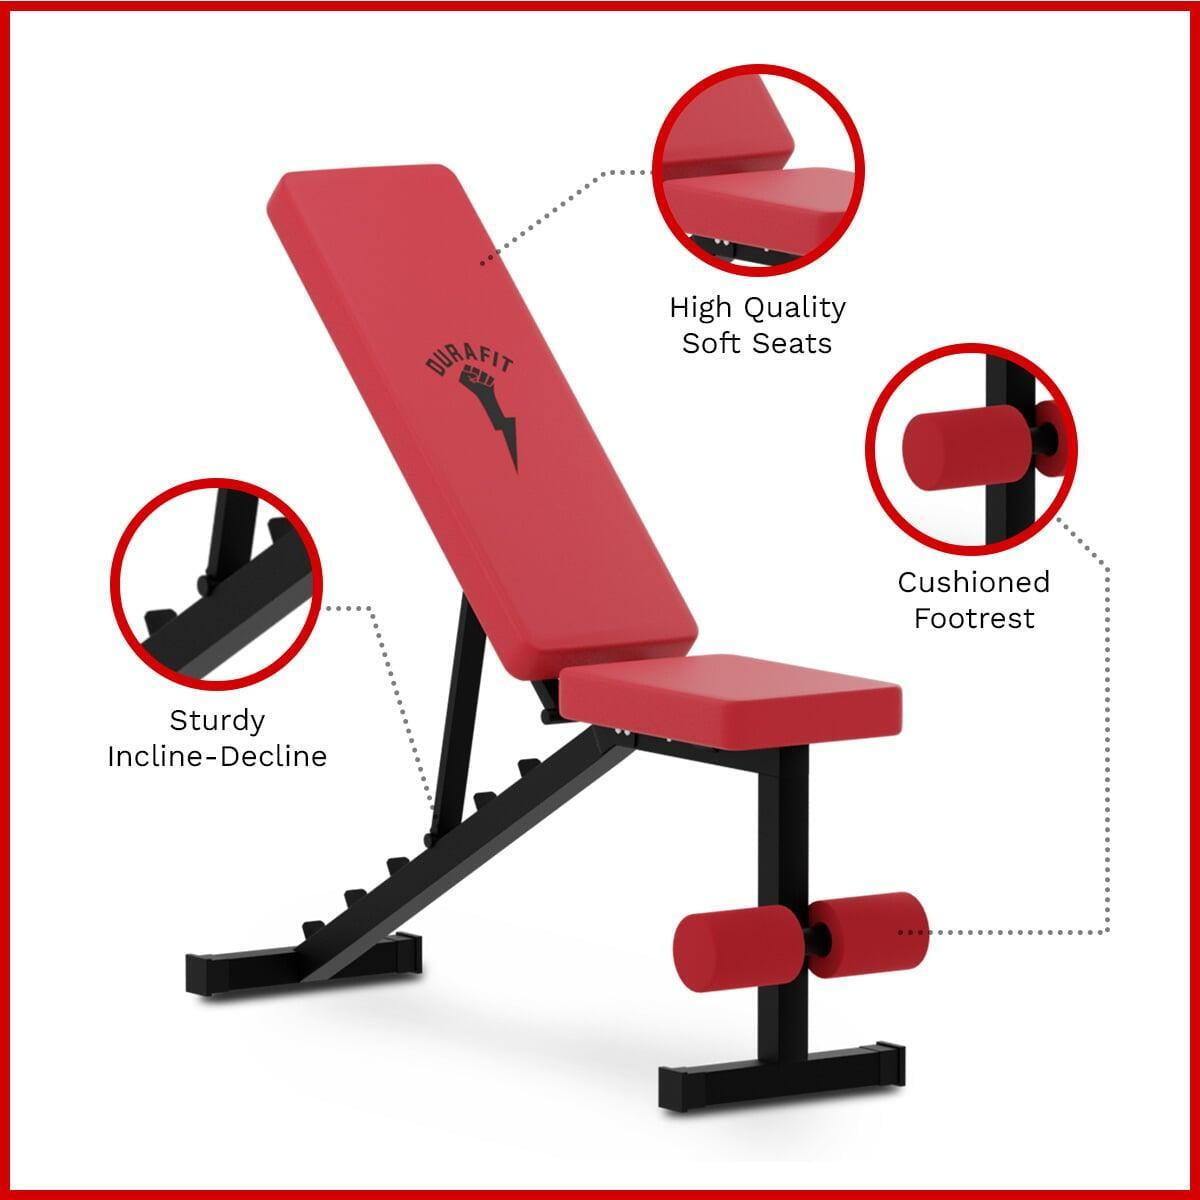 Durafit Foldable Bench FB01 with smooth and comfortable